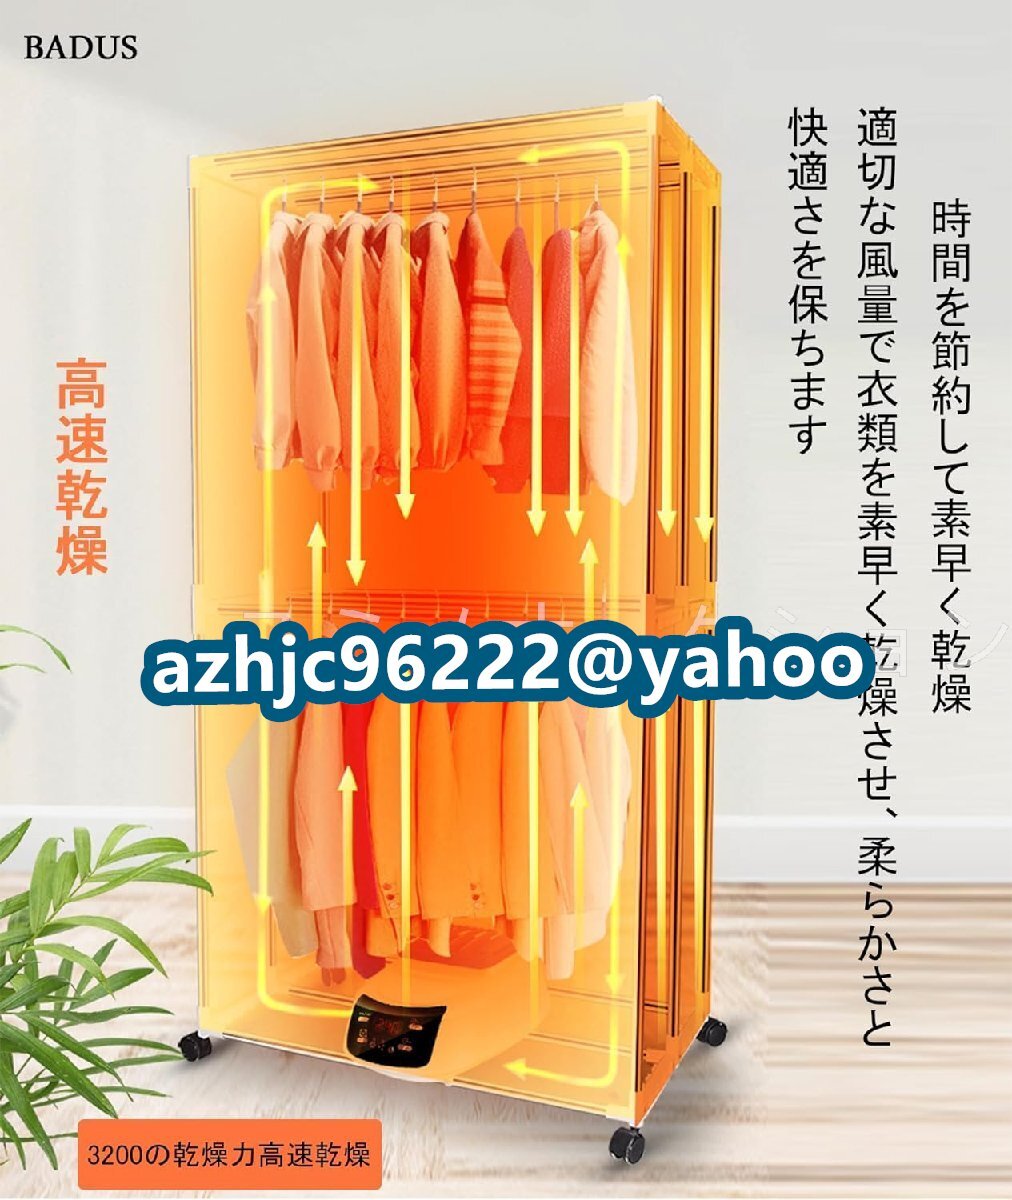  super popular * dryer folding dryer 110V hanger dryer 2 layer. made of stainless steel rack sudden speed dry rainy season measures home use timer with function 15kg withstand load 